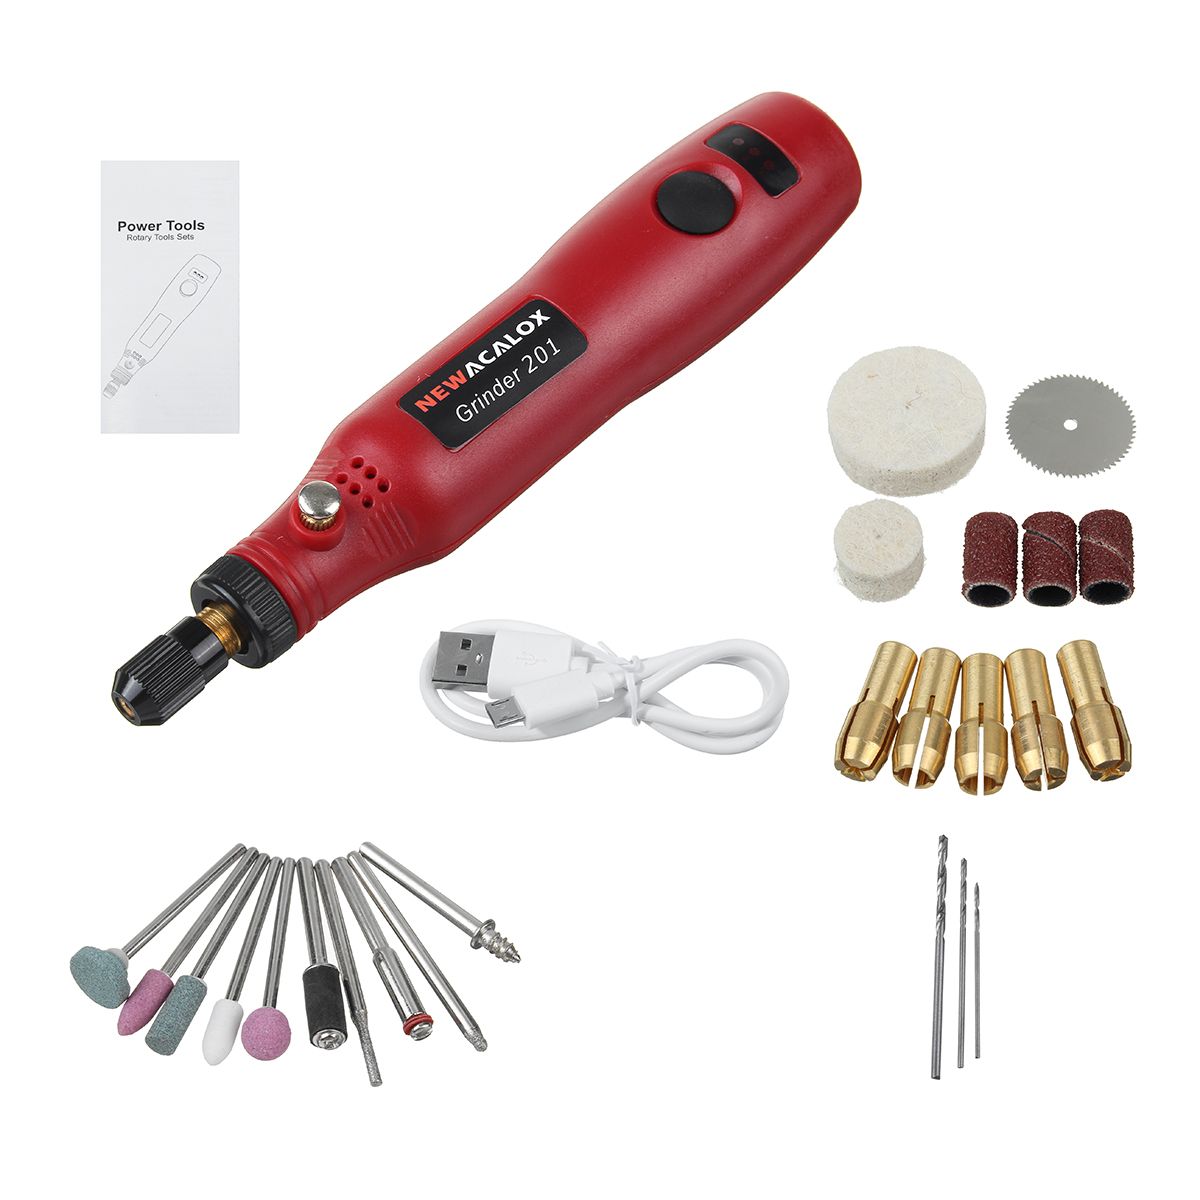 DC-5V-Mini-Electric-Drill-Wireless-Grinder-Grinding-Set-Polishing-Drilling-Rotary-Tool-1723679